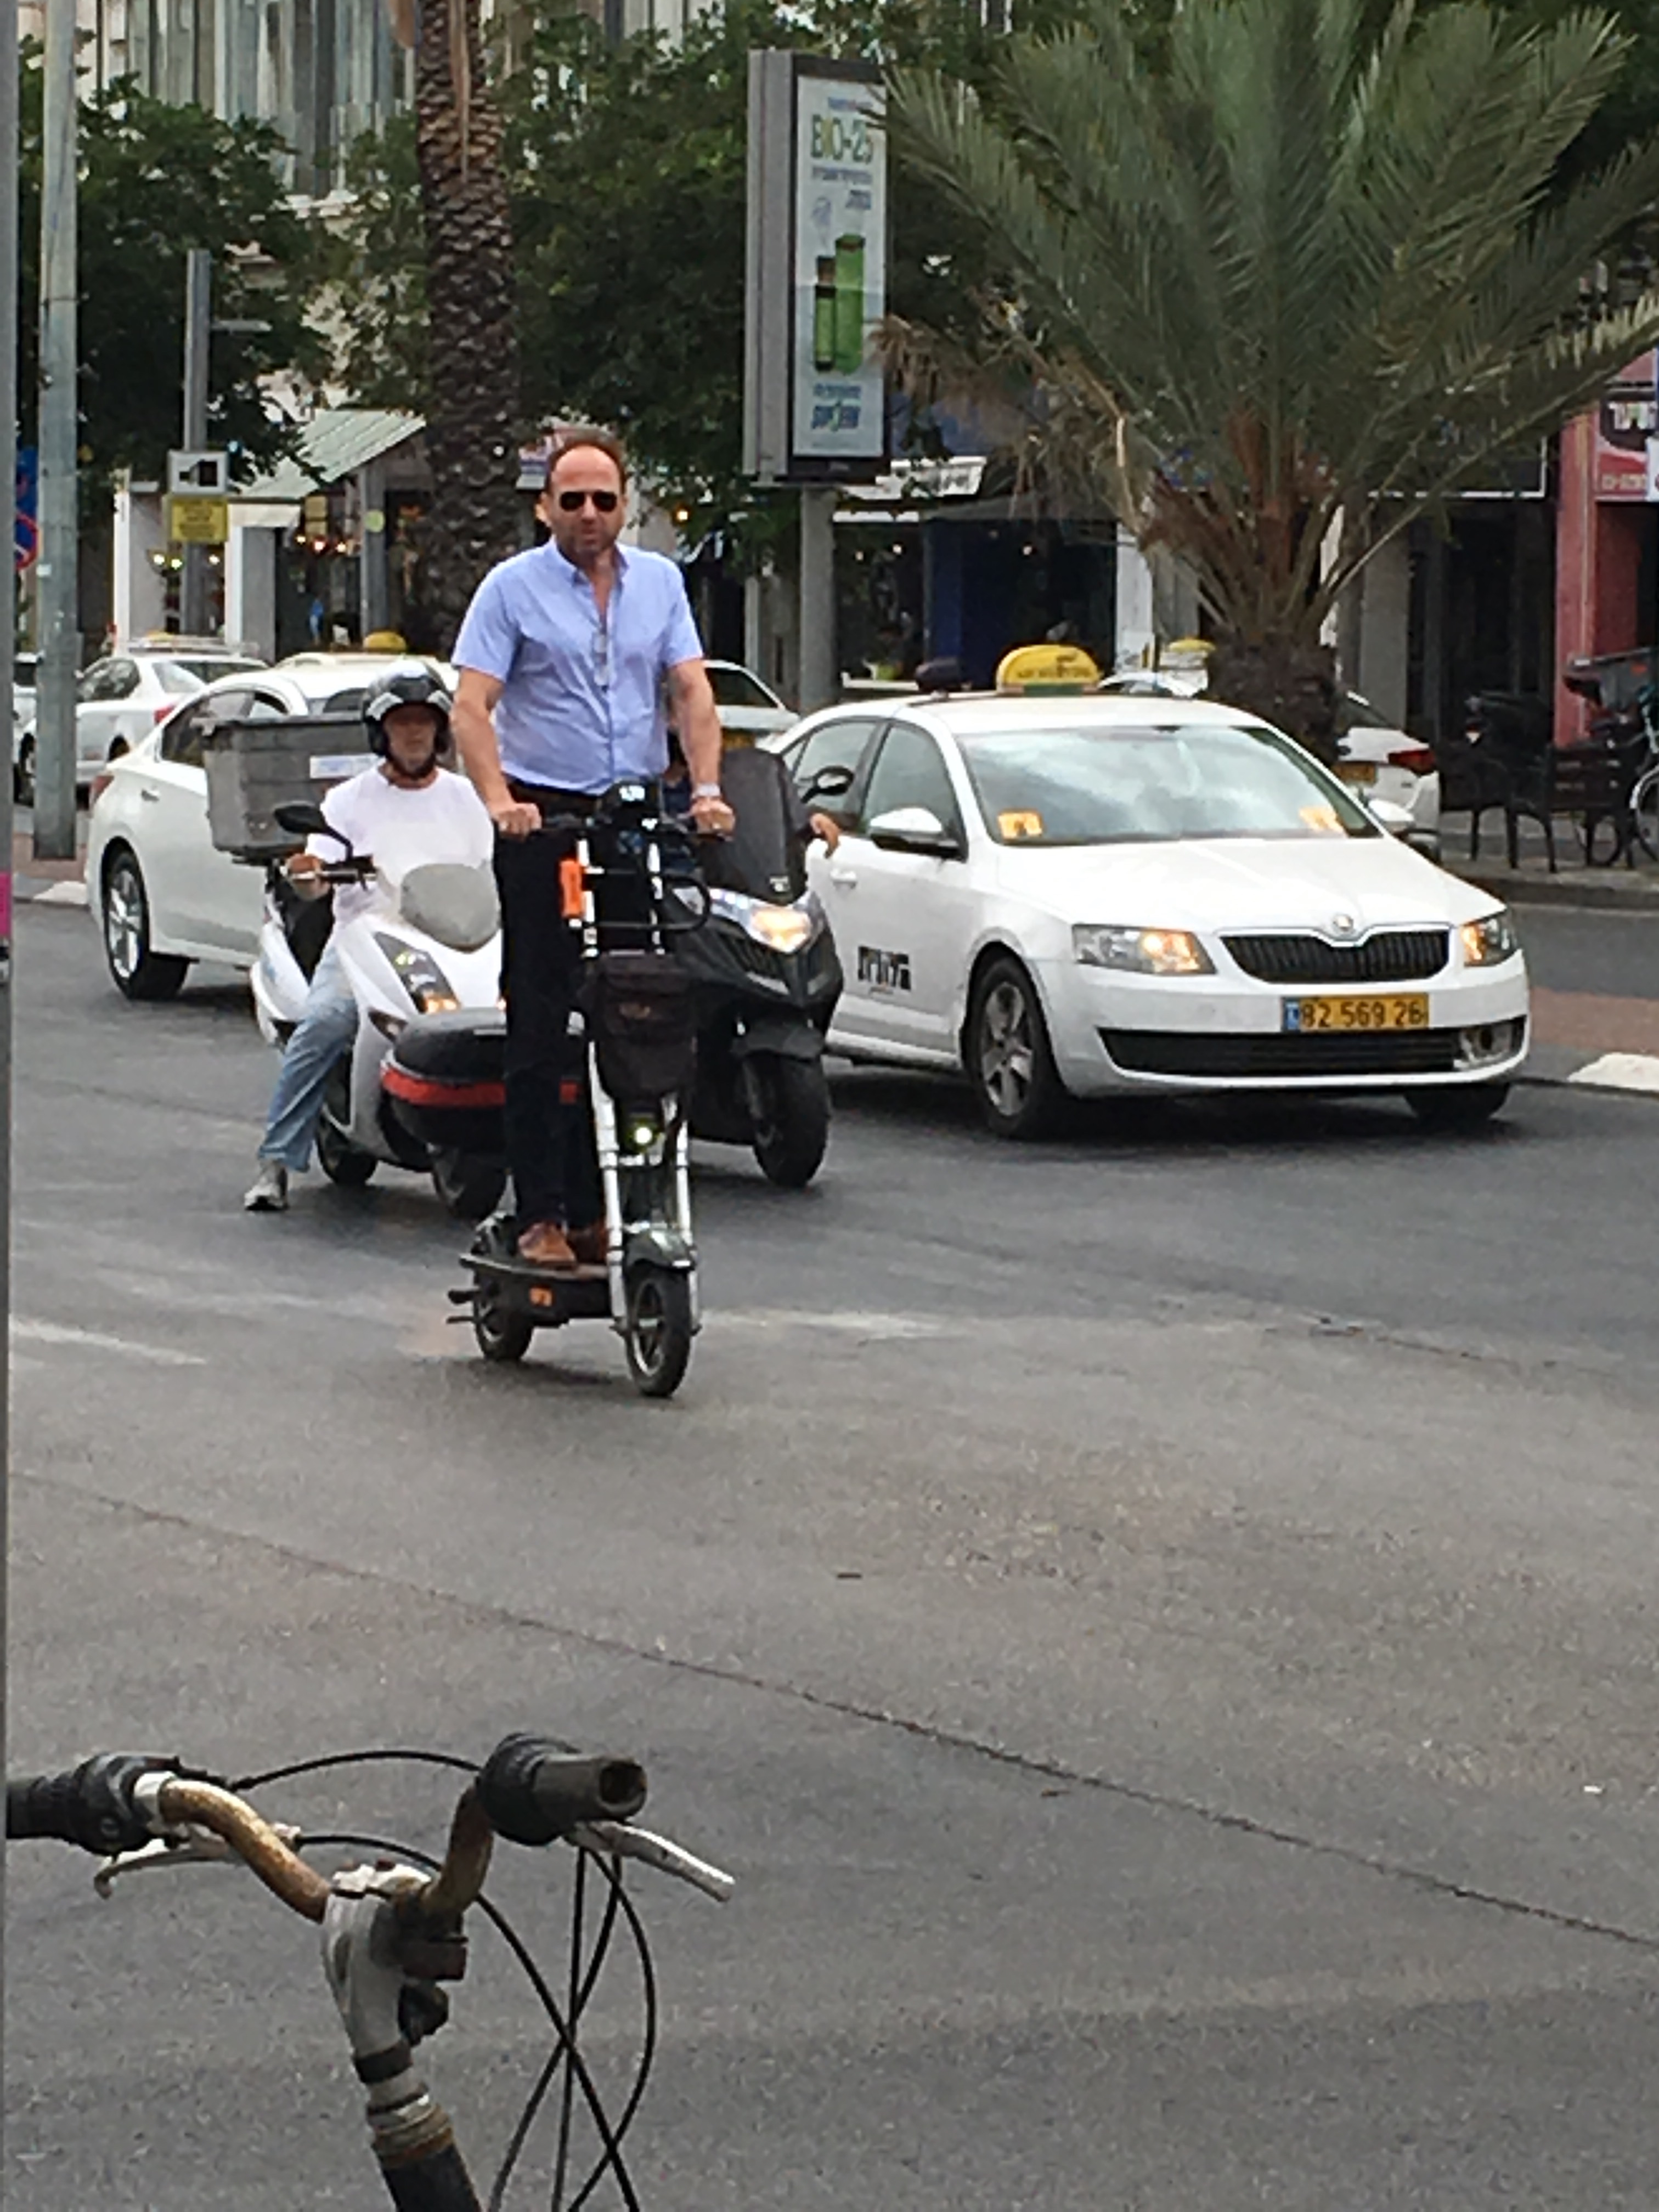 A man on a scooter in traffic. Tel Aviv. Brownell 2019